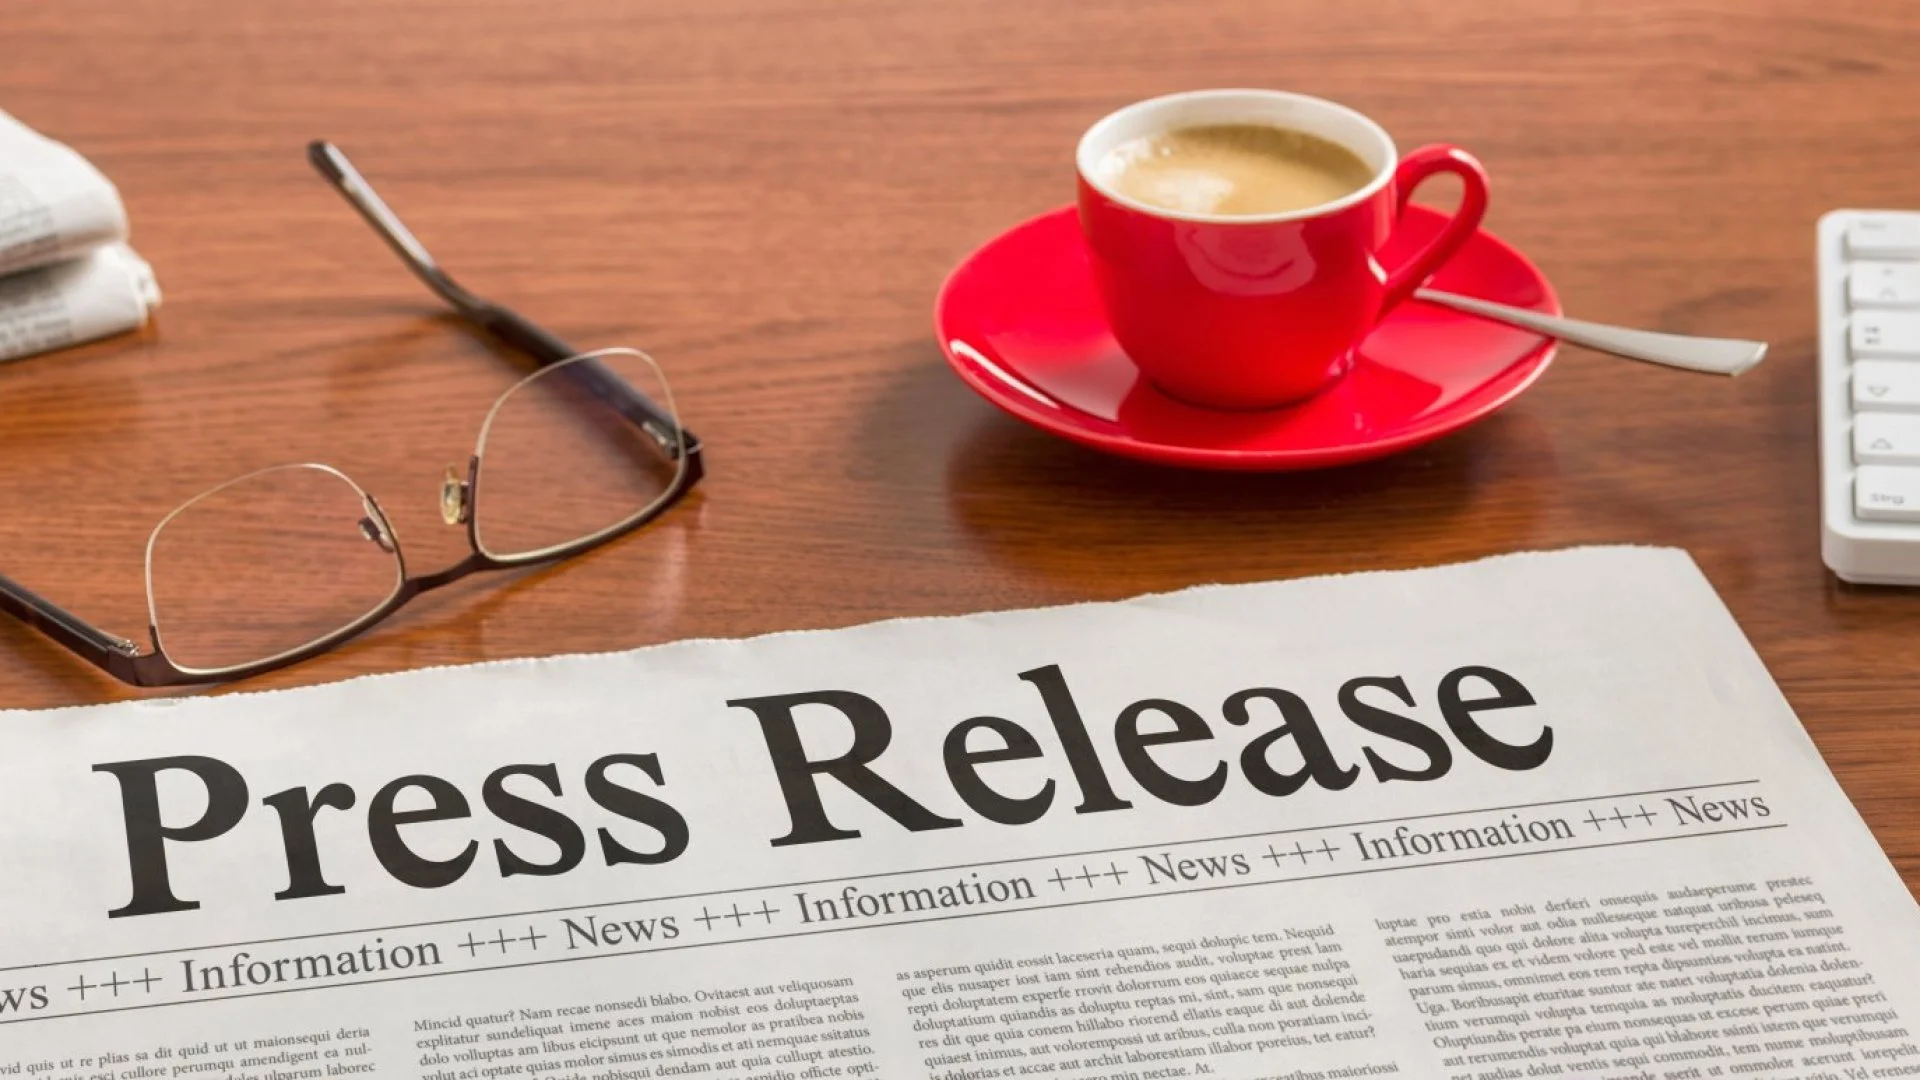 How to Get the Most Out of Your Press Release